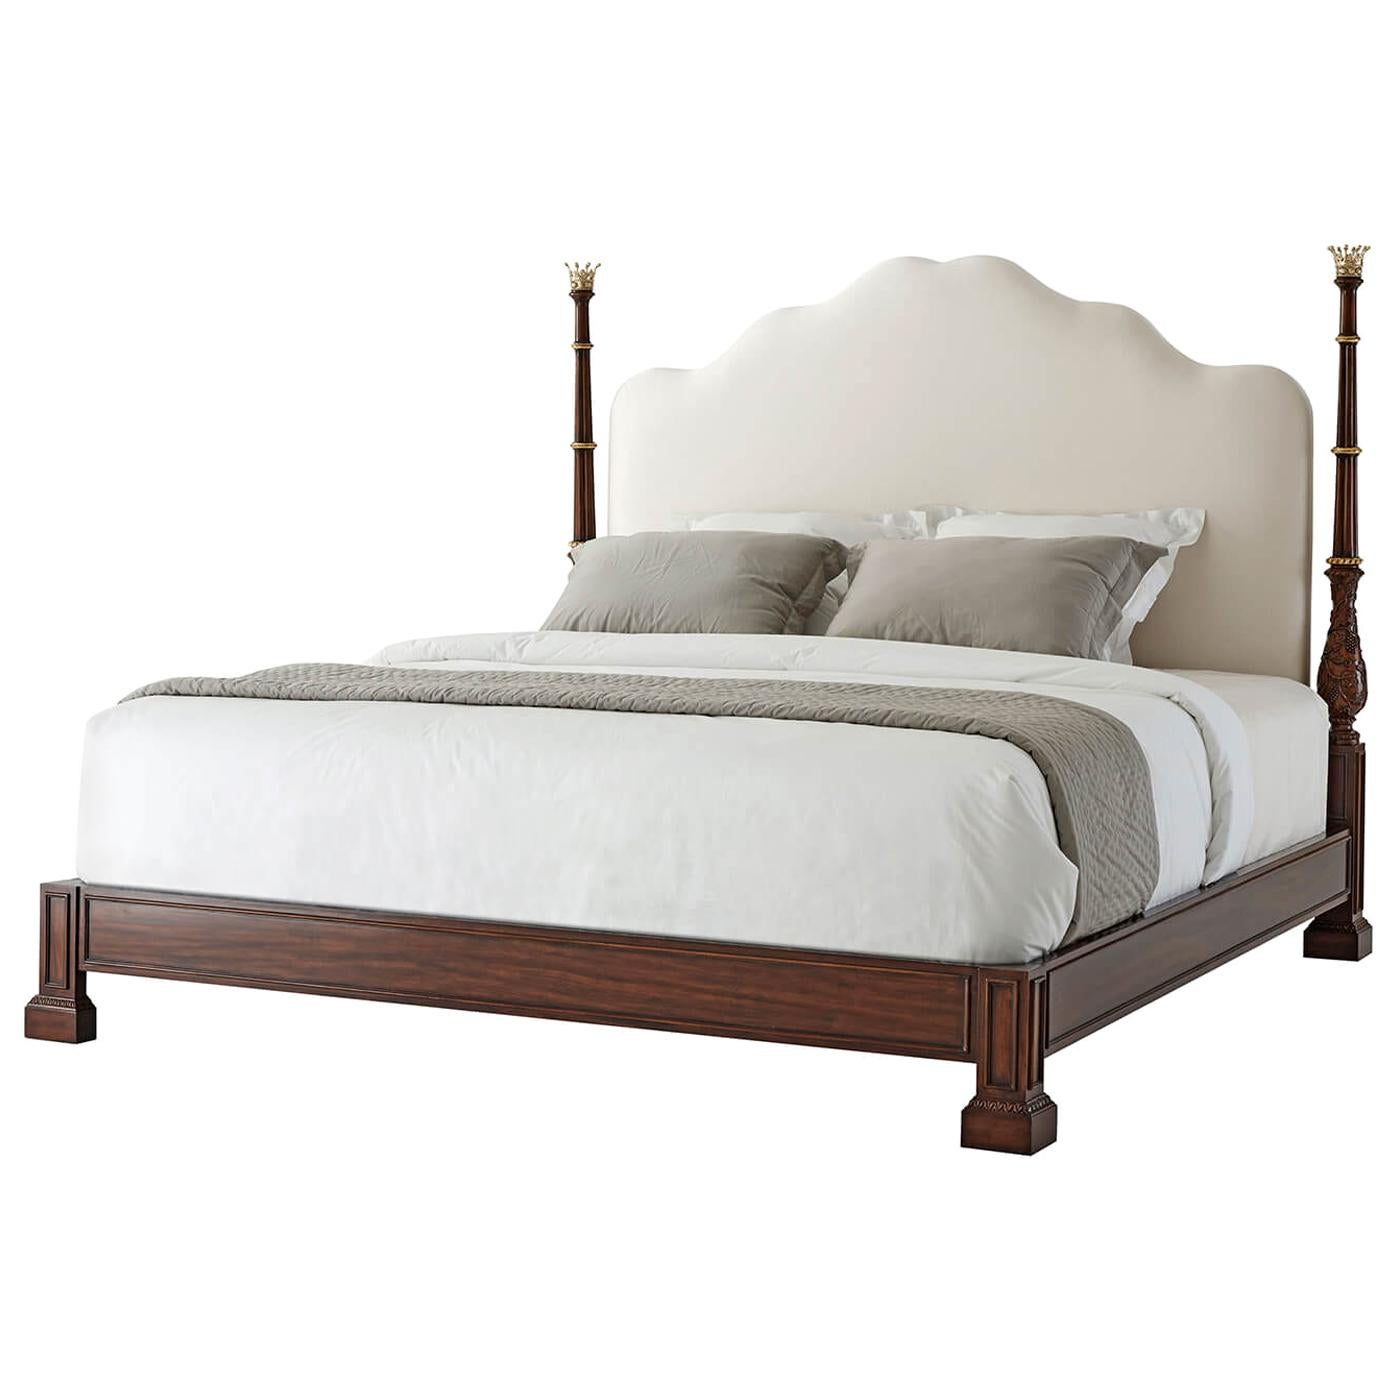 George III Style King Size Bed